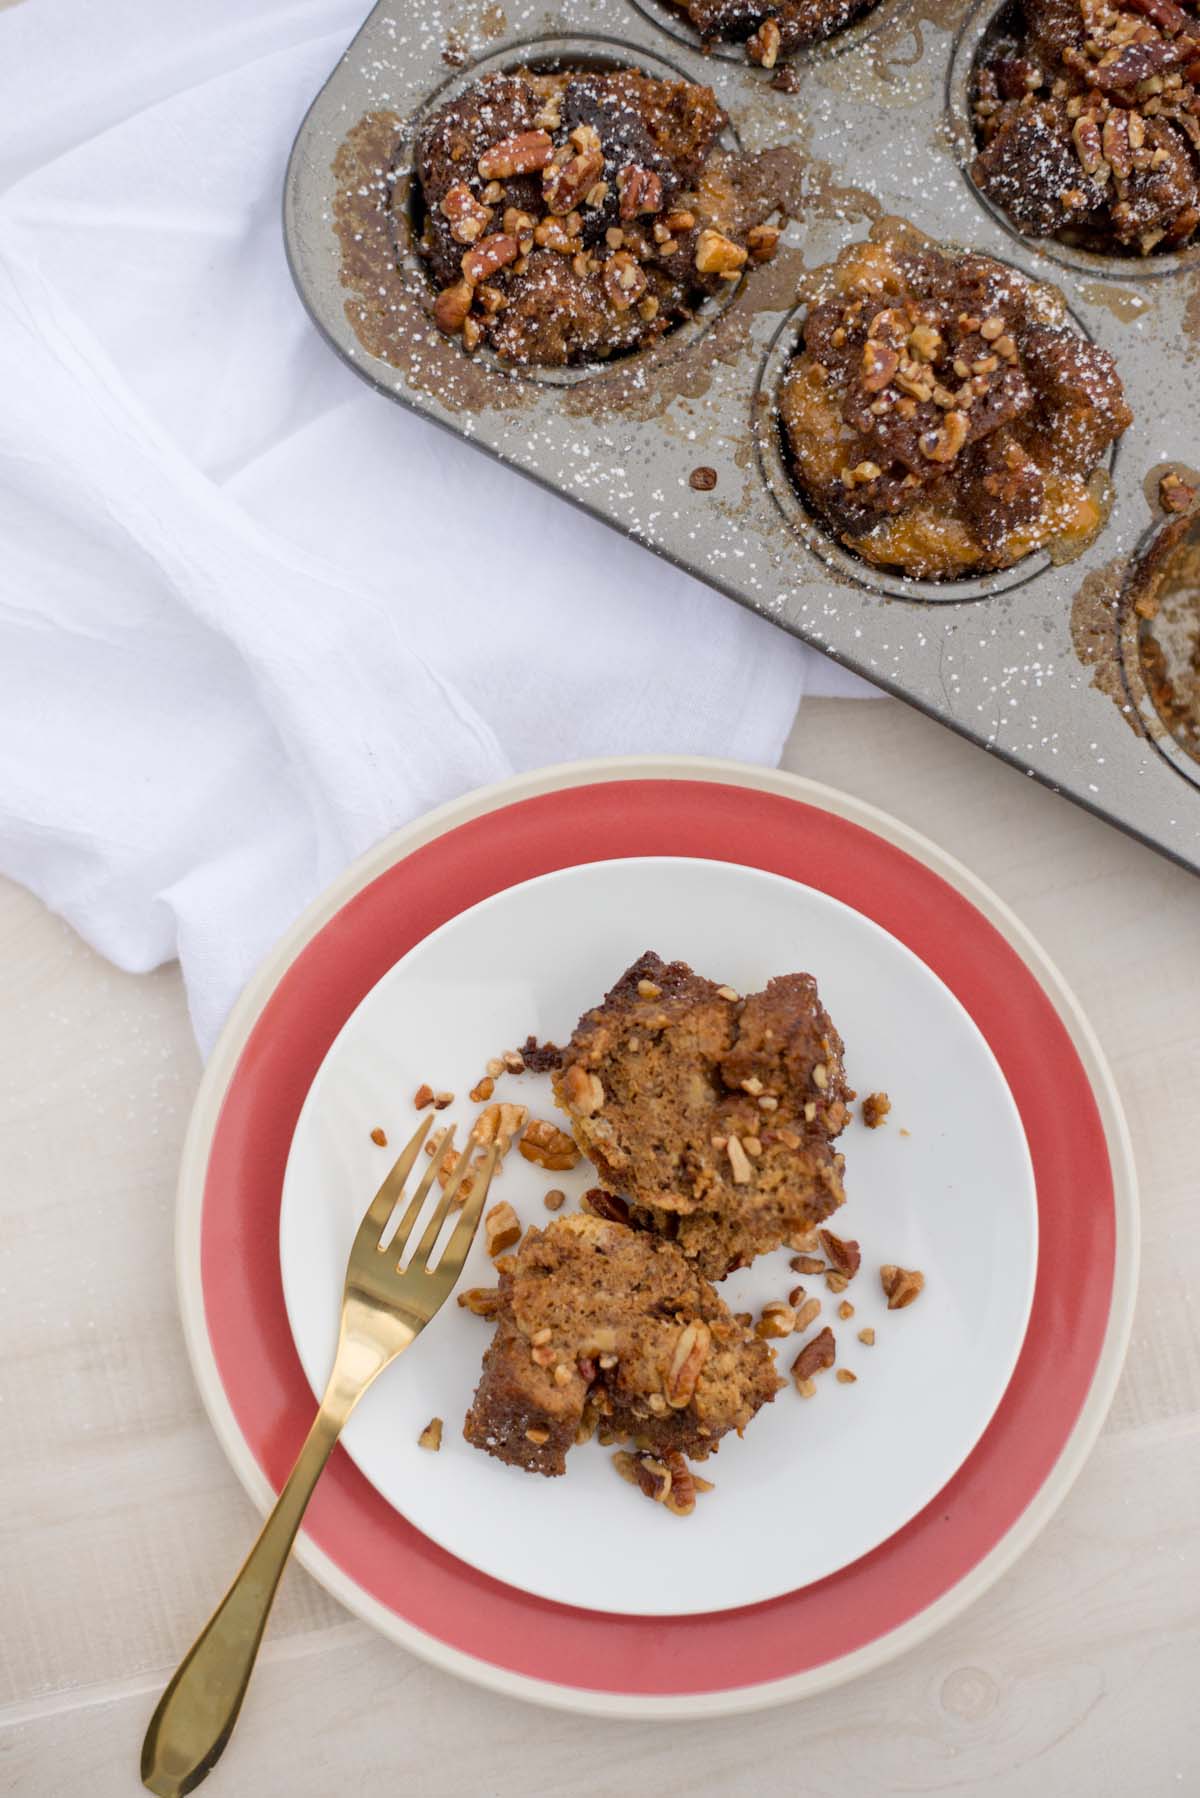 Change up breakfast with these quick, easy and on-the-go banana bread french toast cups